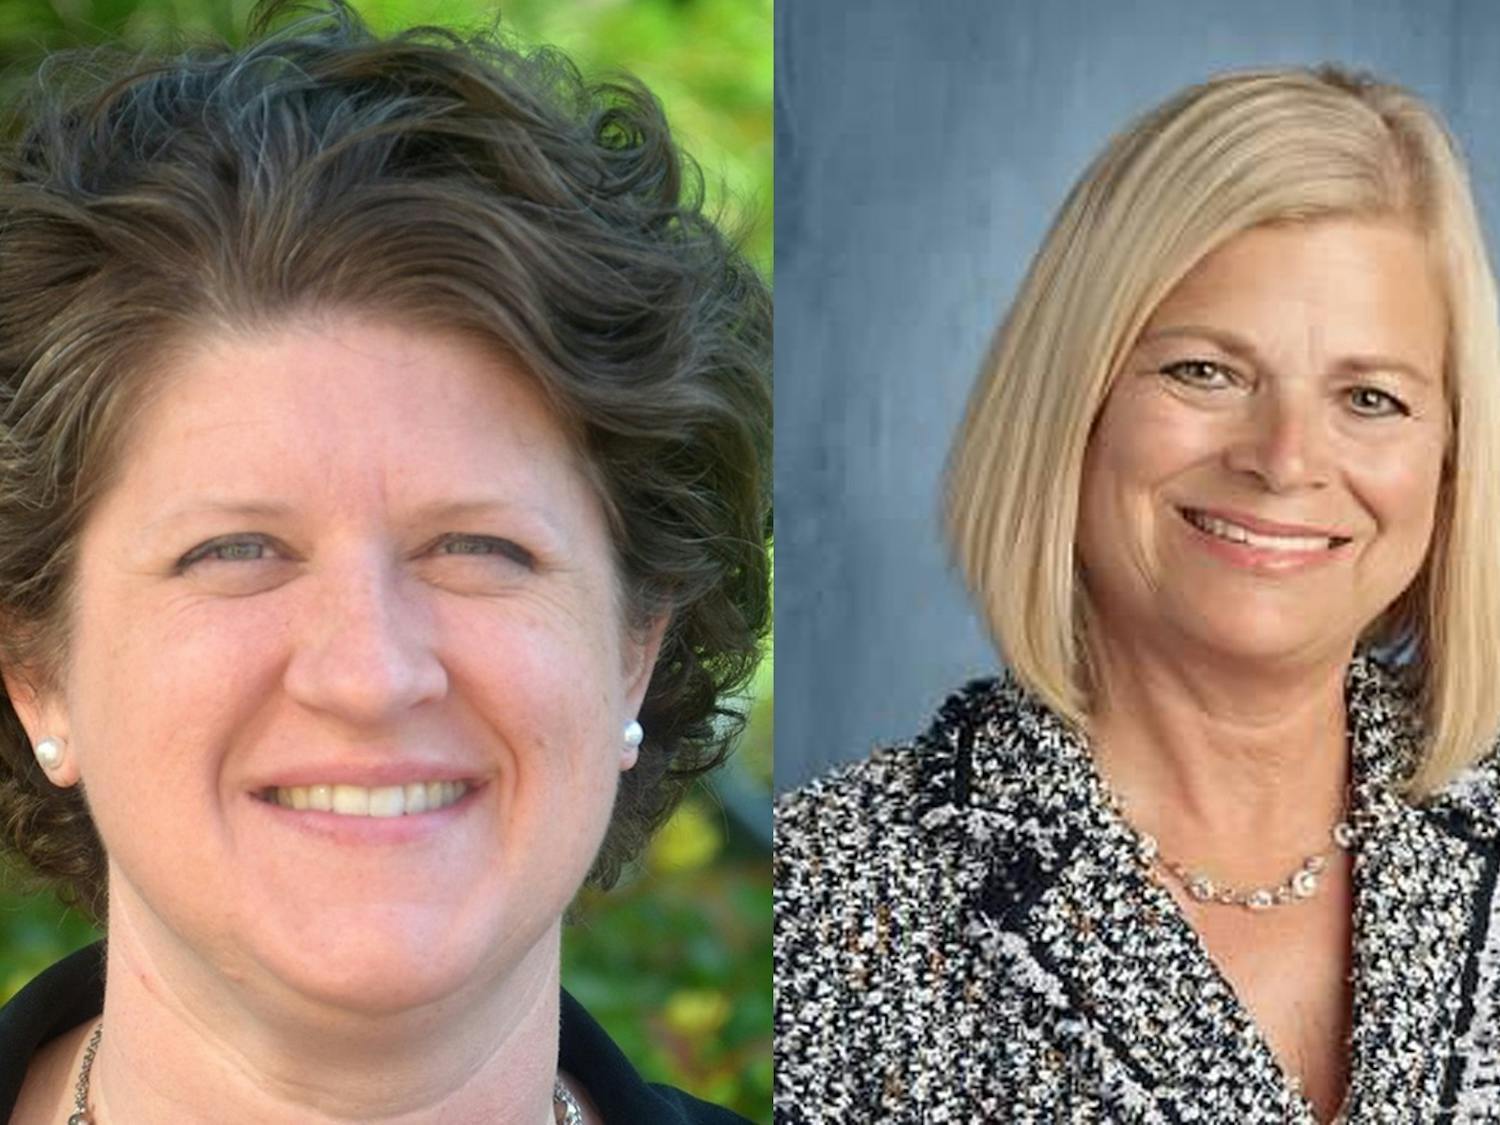 Side by side photo of Wisconsin Superintendent candidates, Jill Underly and Deborah Kerr.